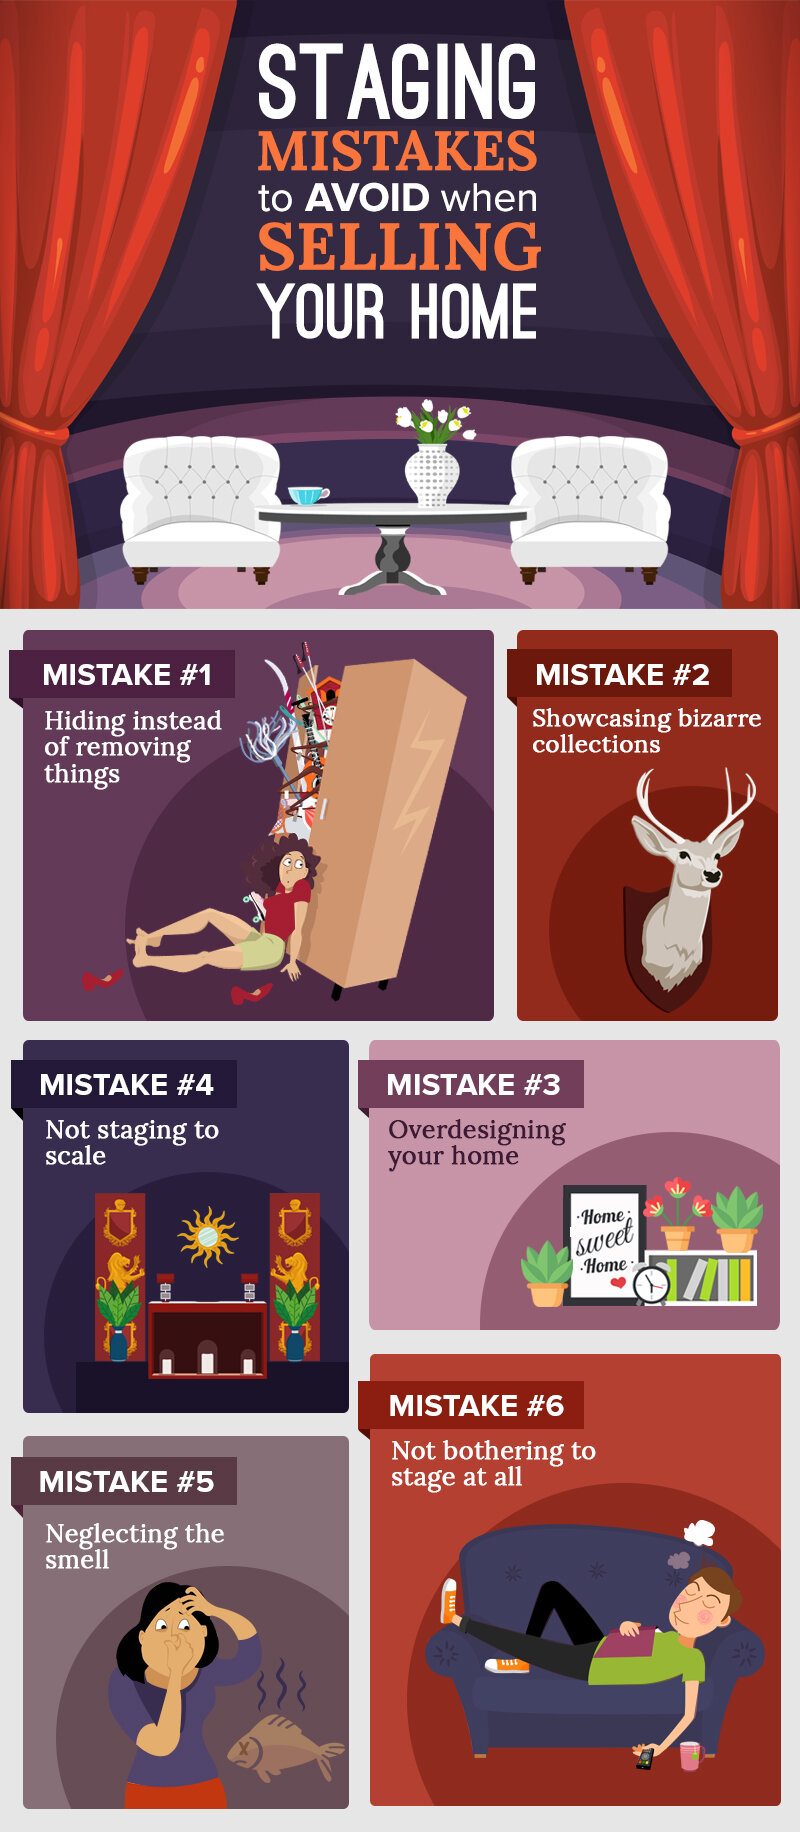 6 Staging Mistakes To Avoid When Selling Your Home